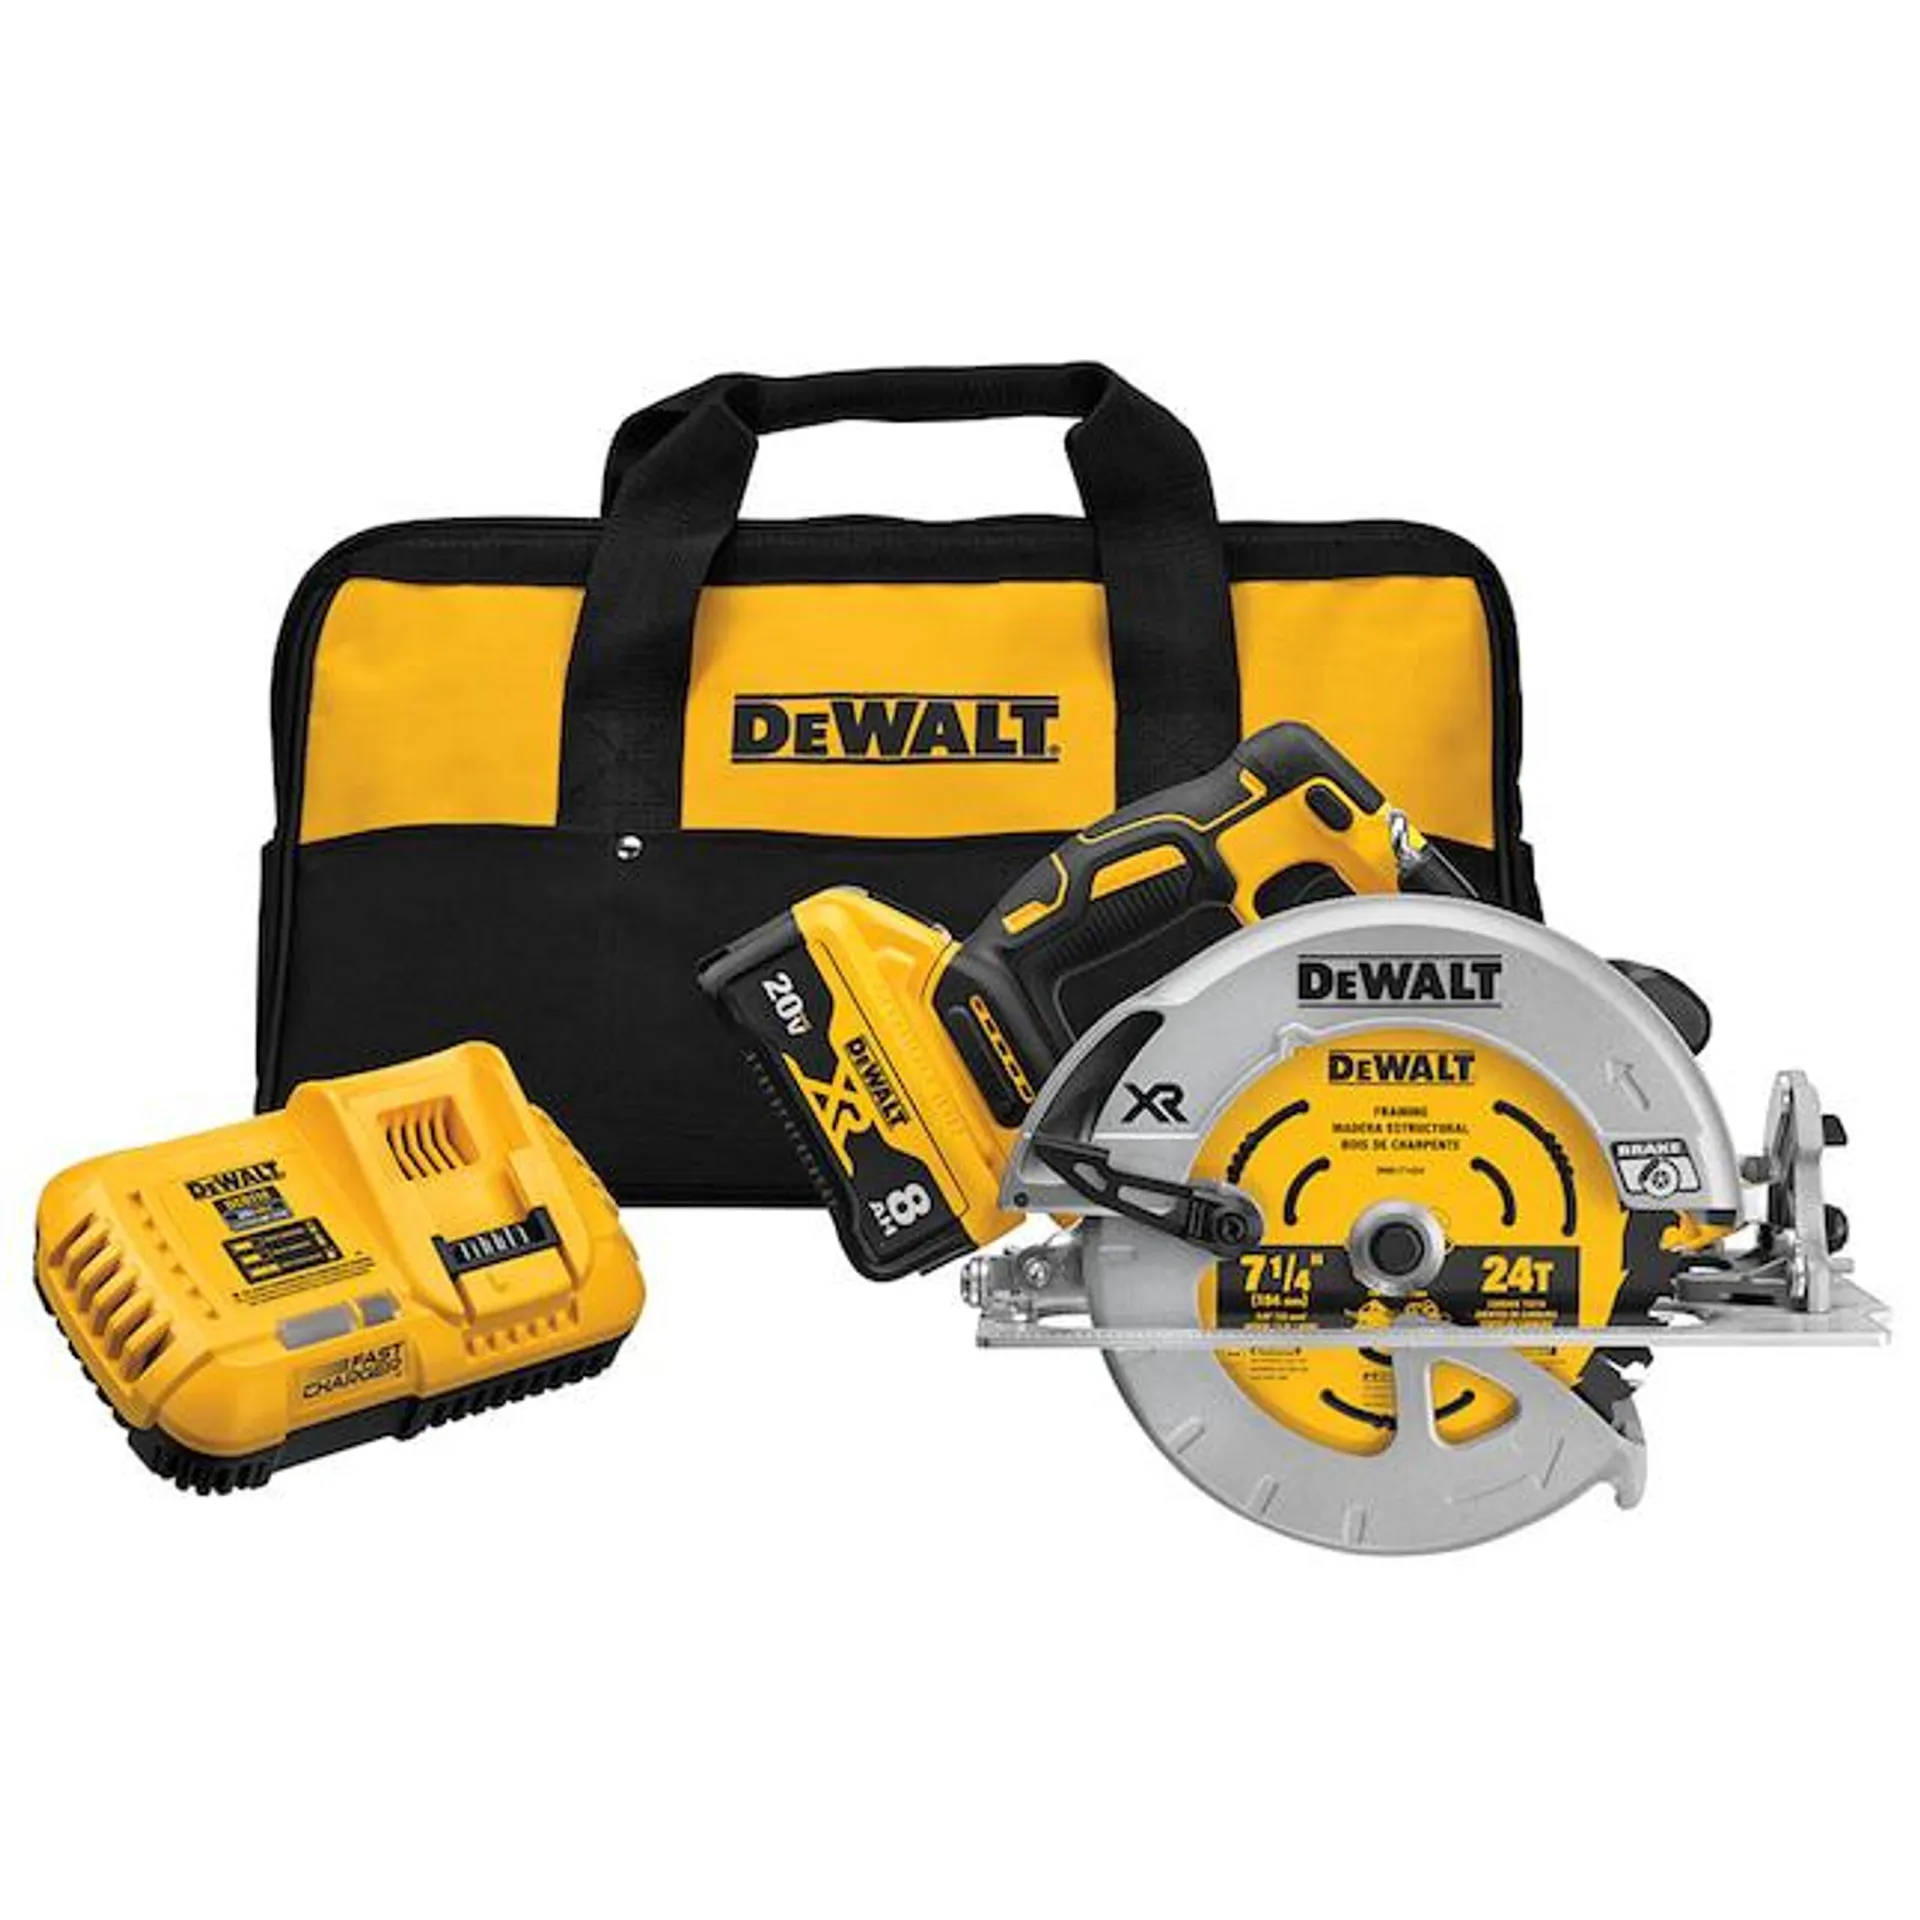 DEWALT XR POWER DETECT 20-volt Max 7-1/4-in Brushless Cordless Circular Saw Kit Circular Saw (1-Batteries and Charger Included)